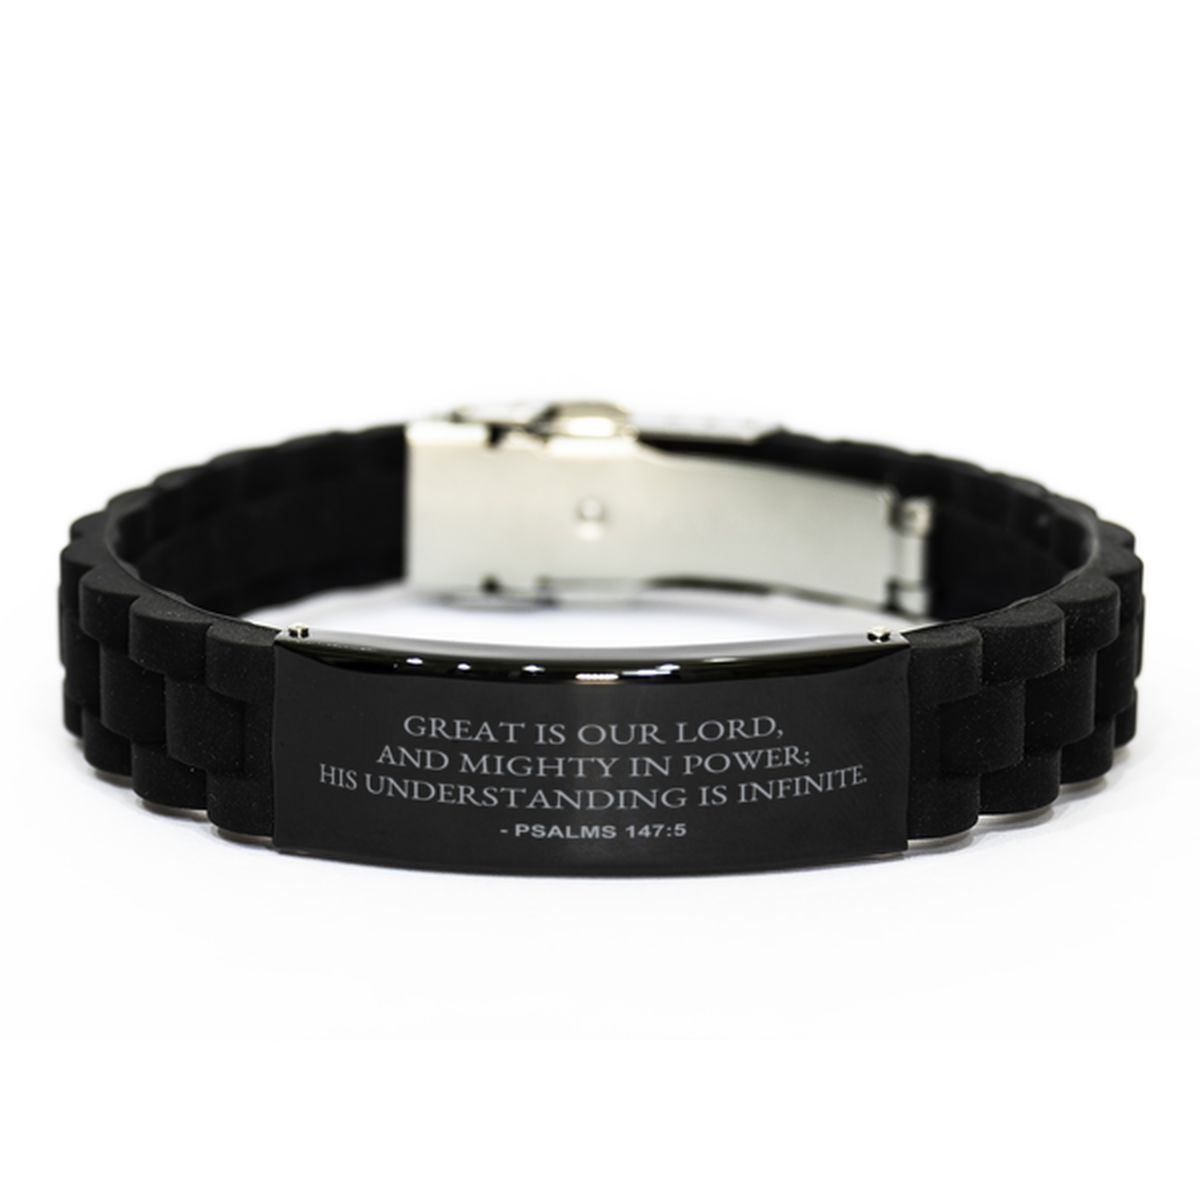 Bible Verse Black Bracelet,, Psalms 147:5 Great Is Our Lord, And Mighty In Power; His, Inspirational Christian Gifts For Men Women